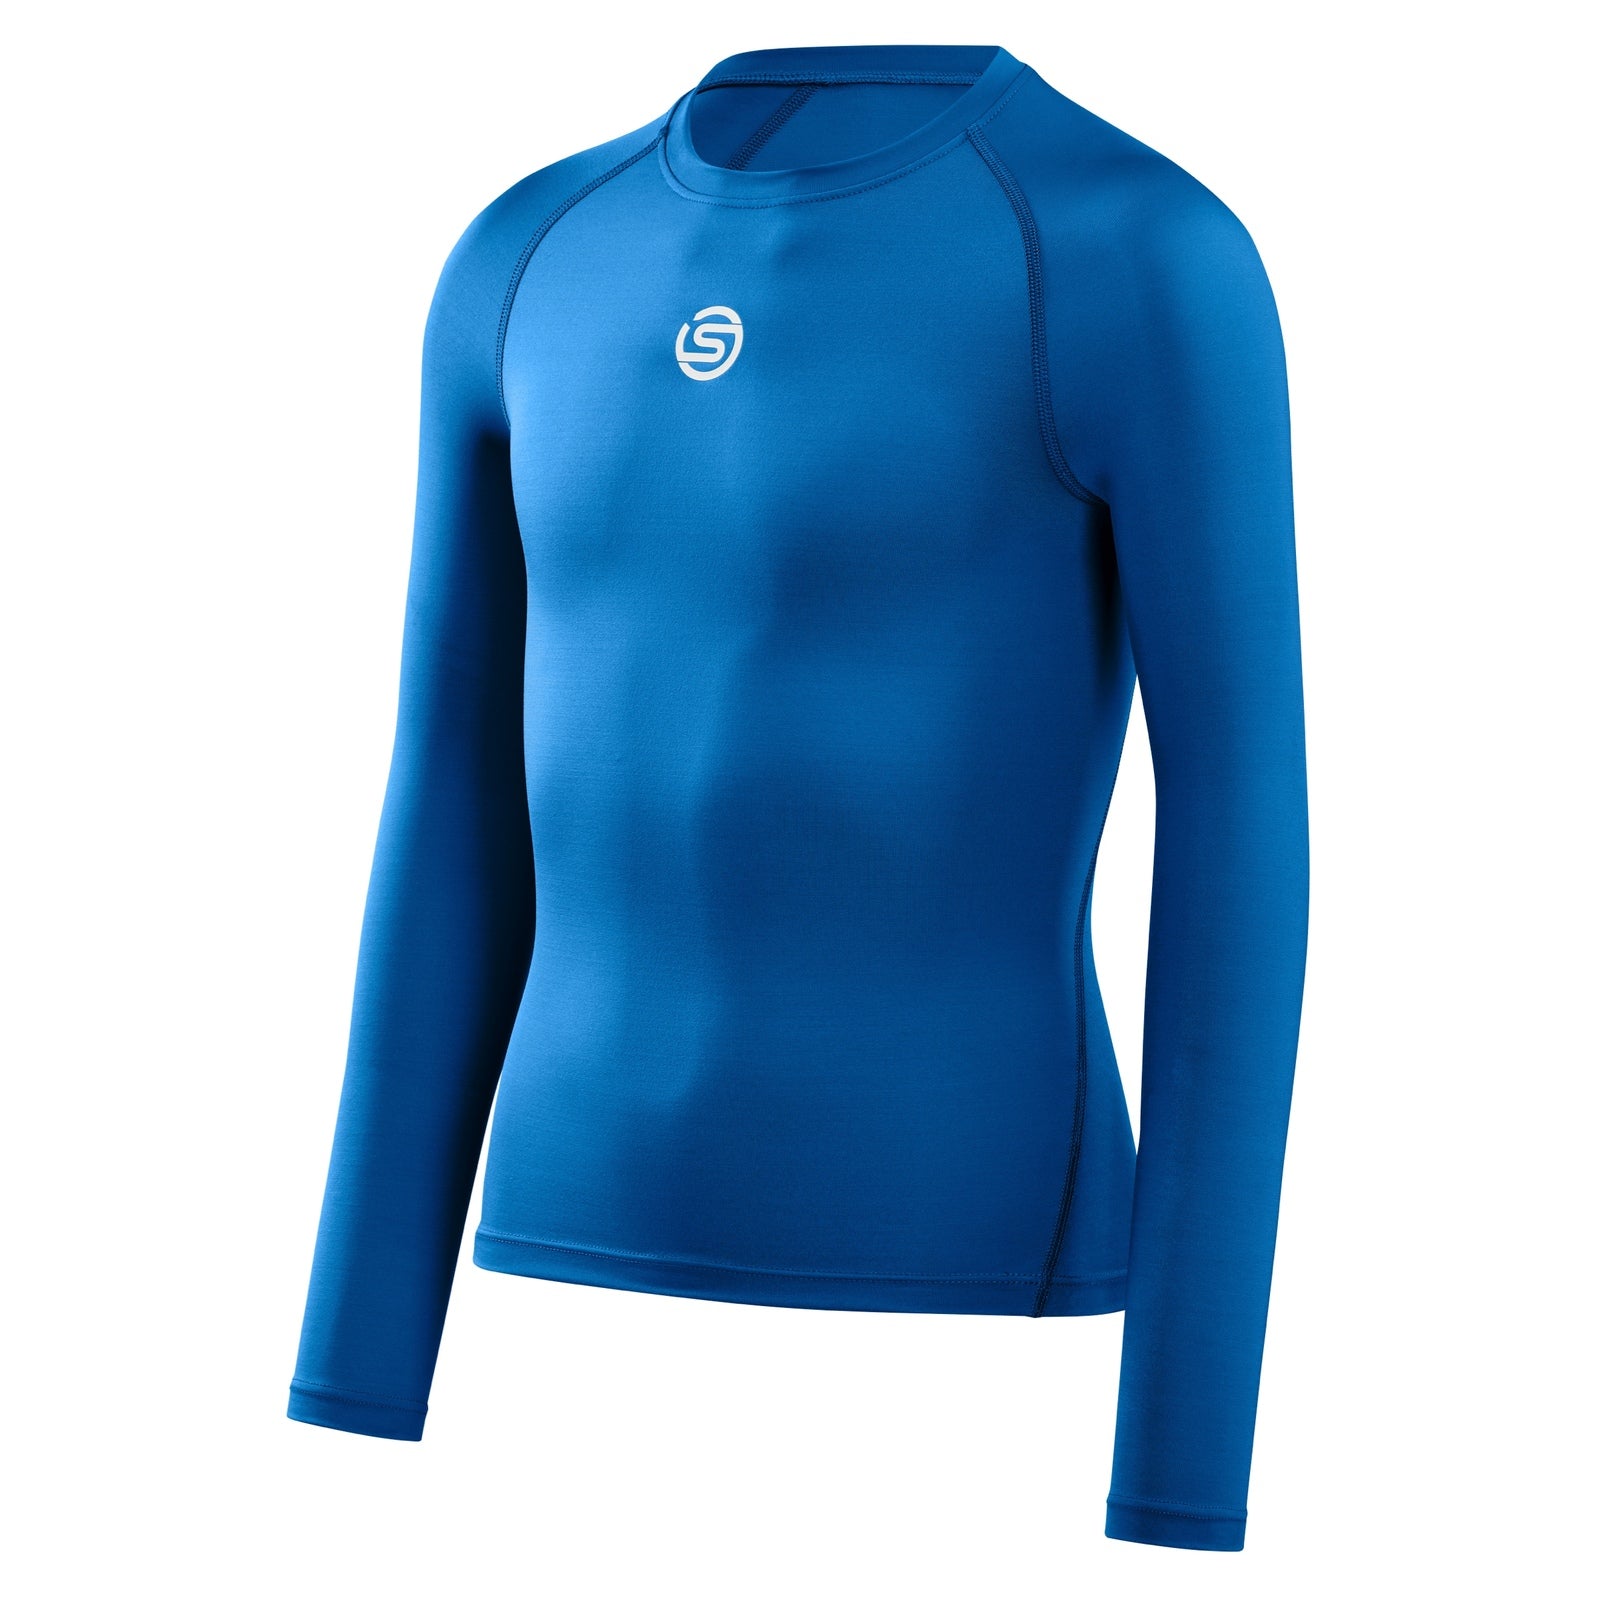 SKINS SERIES-1 Youth Long Sleeve Top Bright Blue